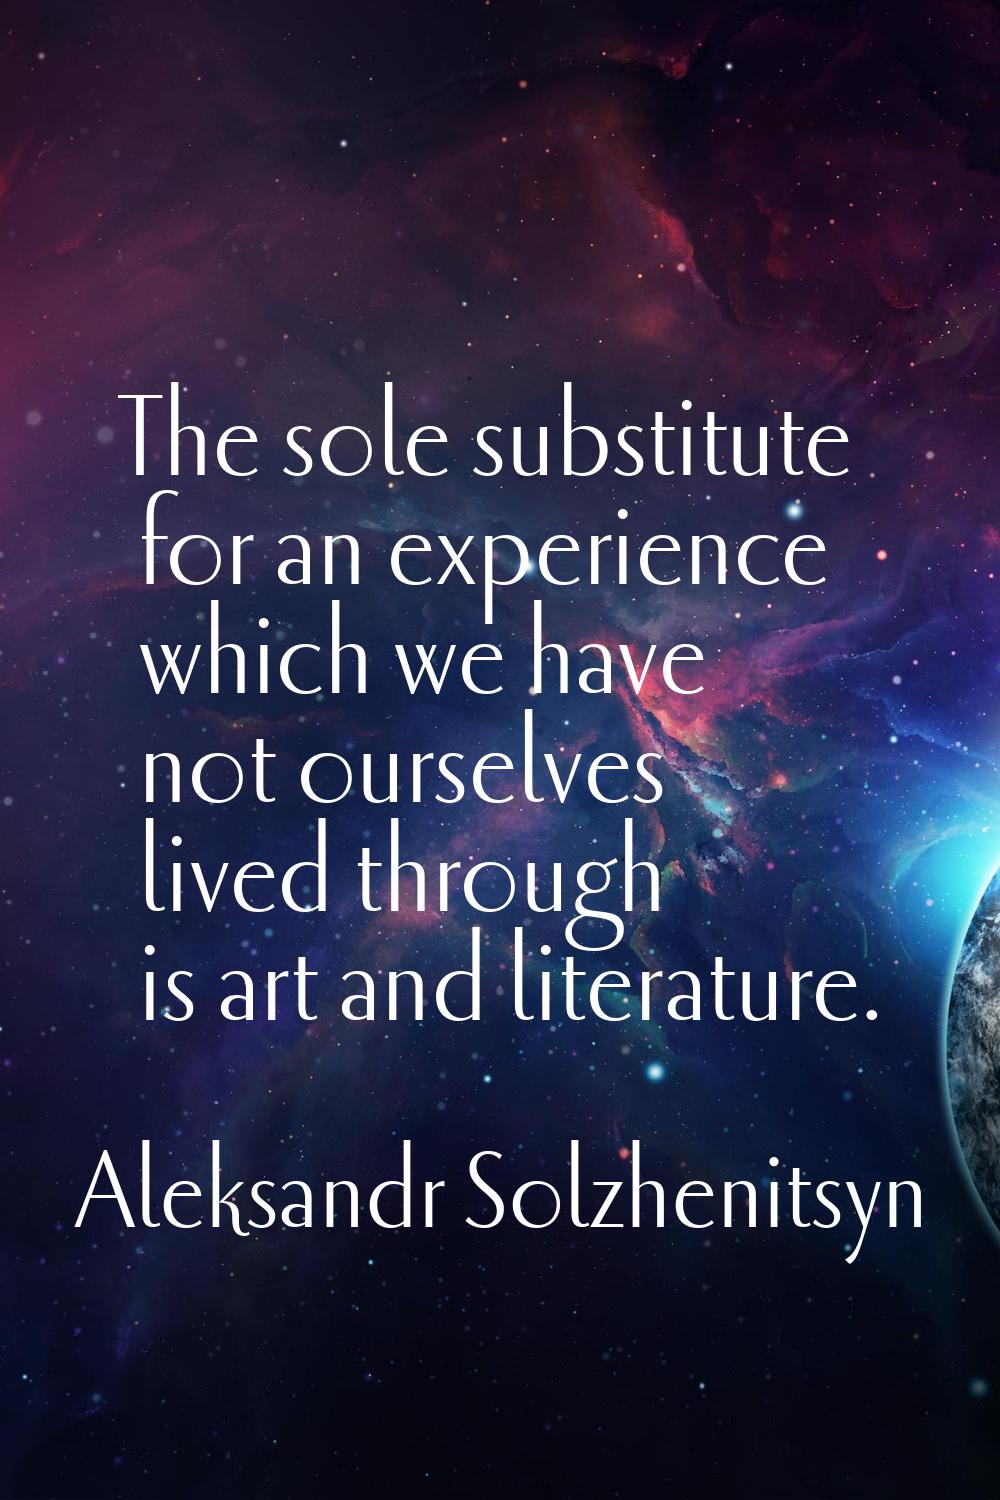 The sole substitute for an experience which we have not ourselves lived through is art and literatu